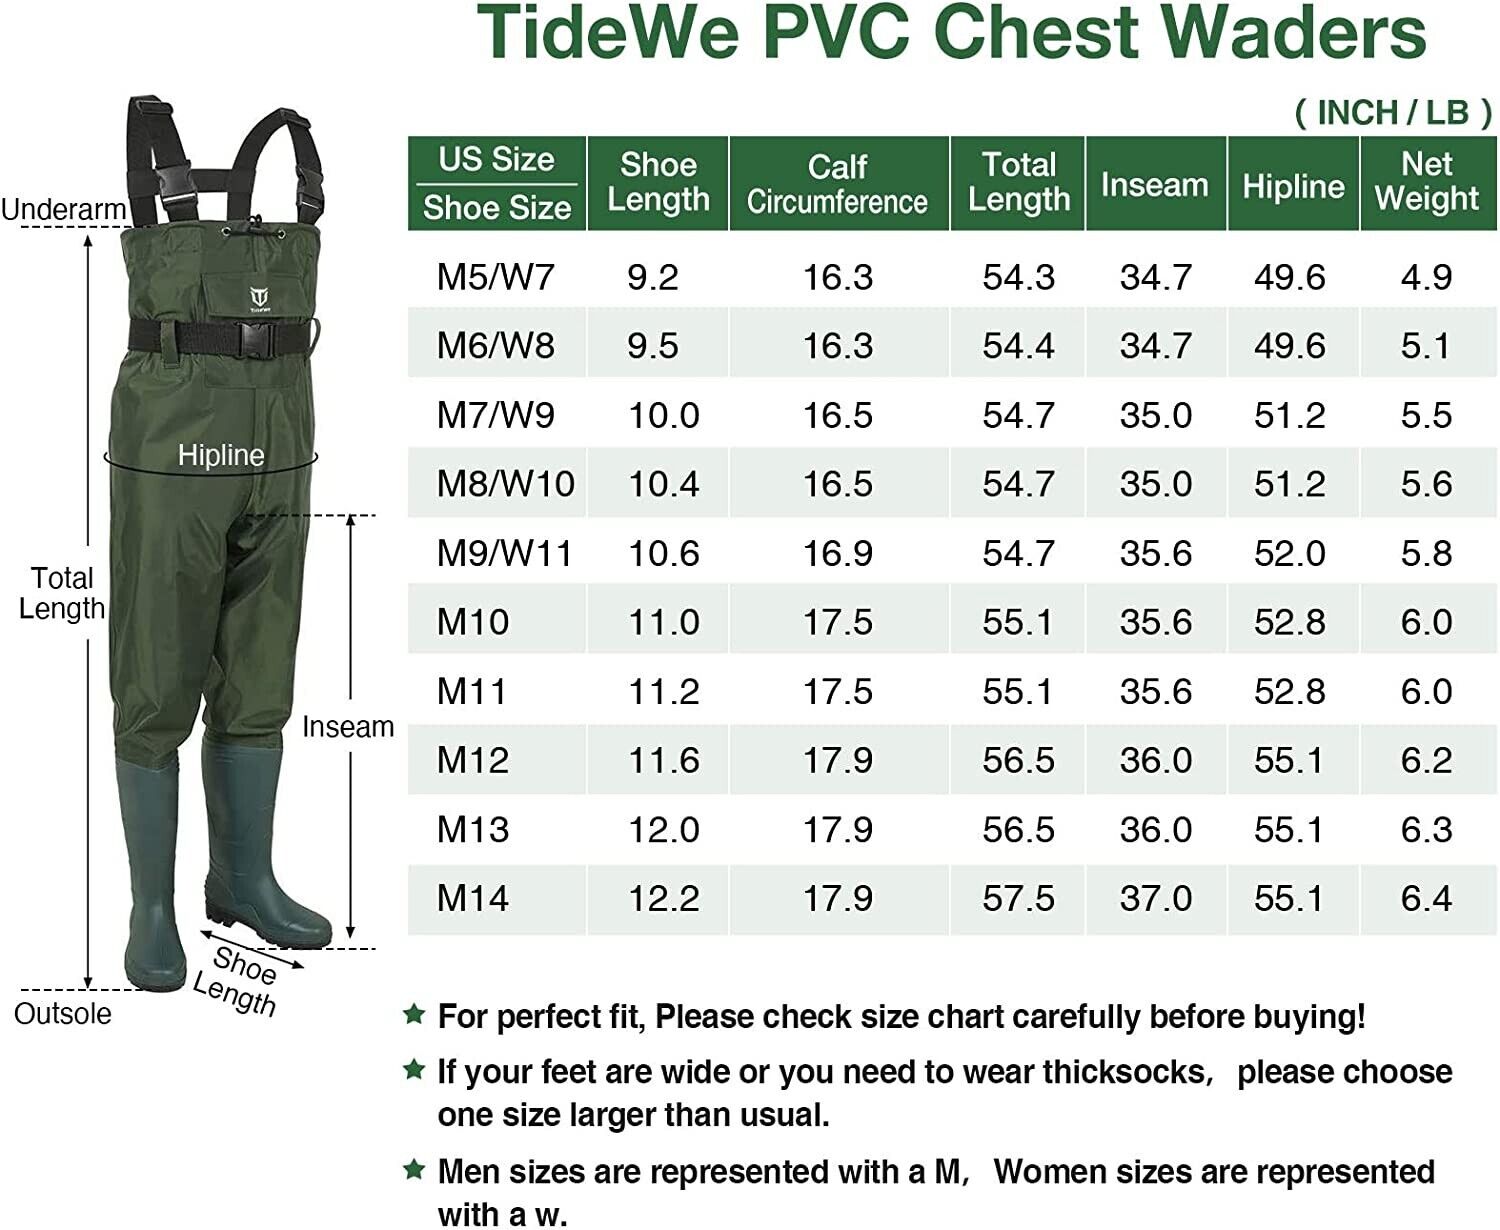 FISHINGSIR Fishing Waders Men with Boots Womens Chest Waders Waterproof  Size 6